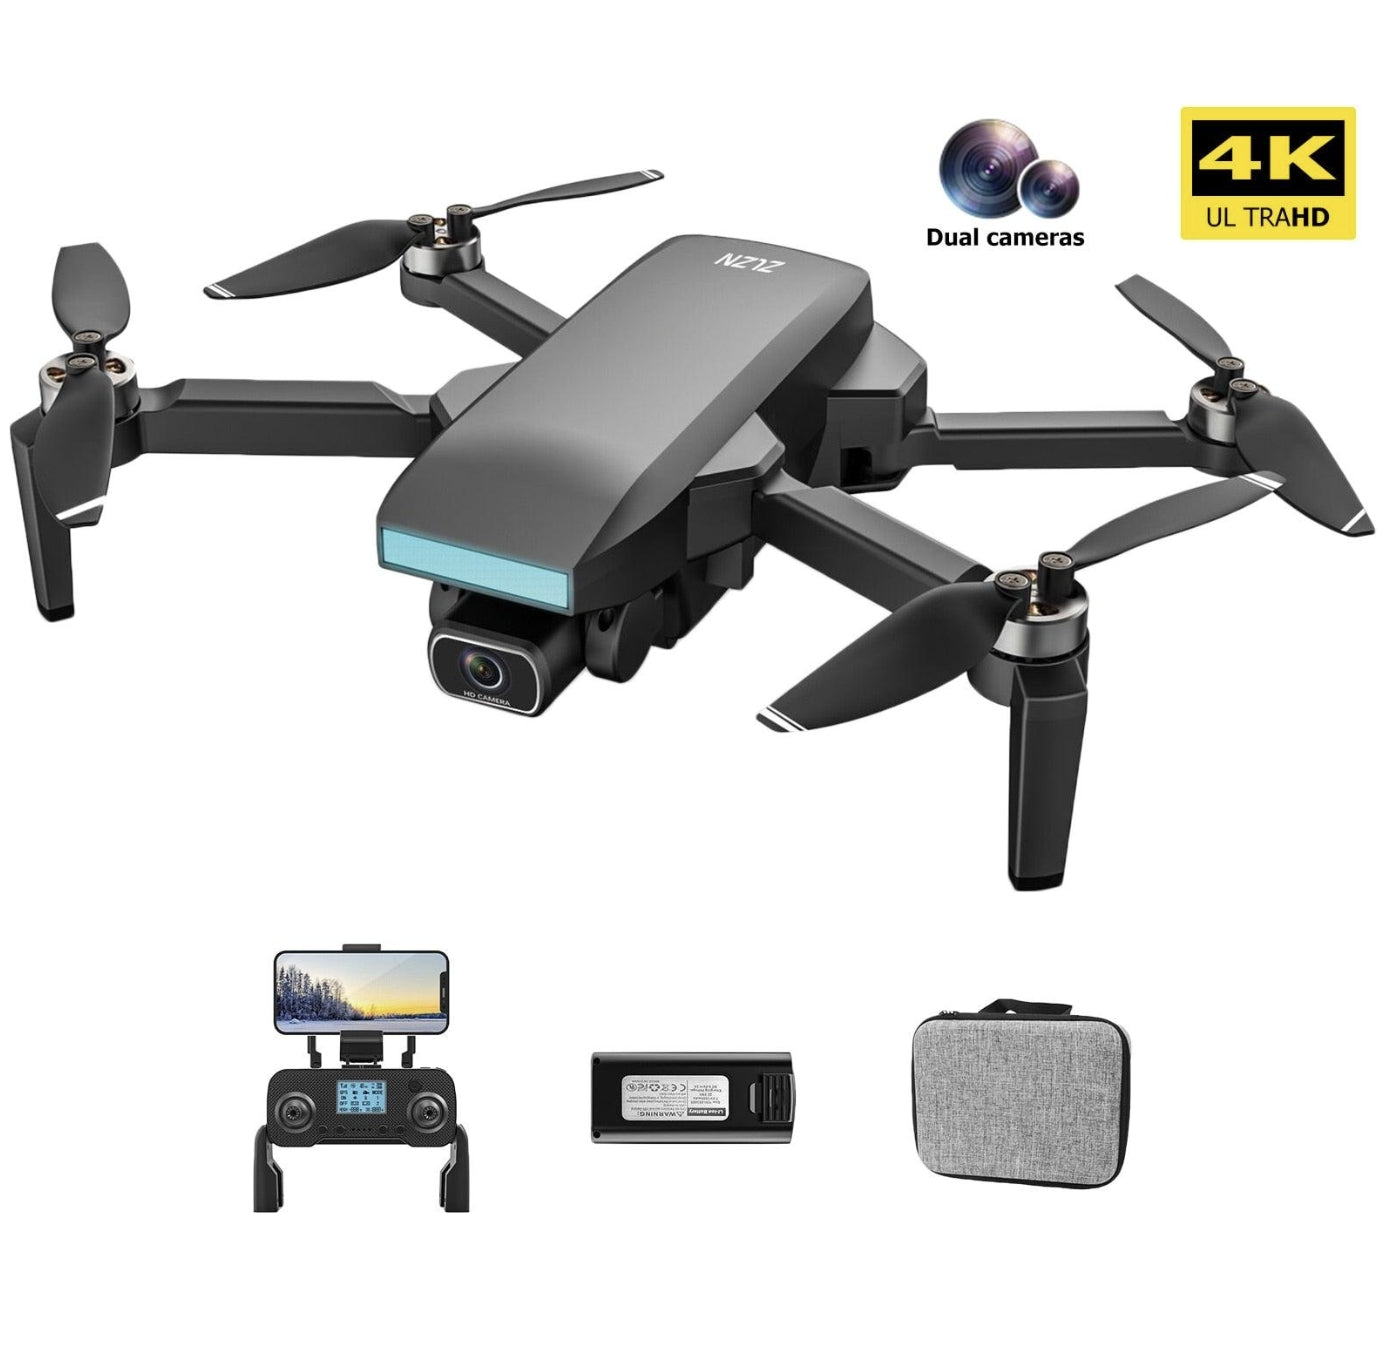 ZLL SG107 Pro Drone - GPS 4K HD Dual Camera FPV Brushless Motor RC Quadcopters 1200m Remote Control Distance for Boys Adults